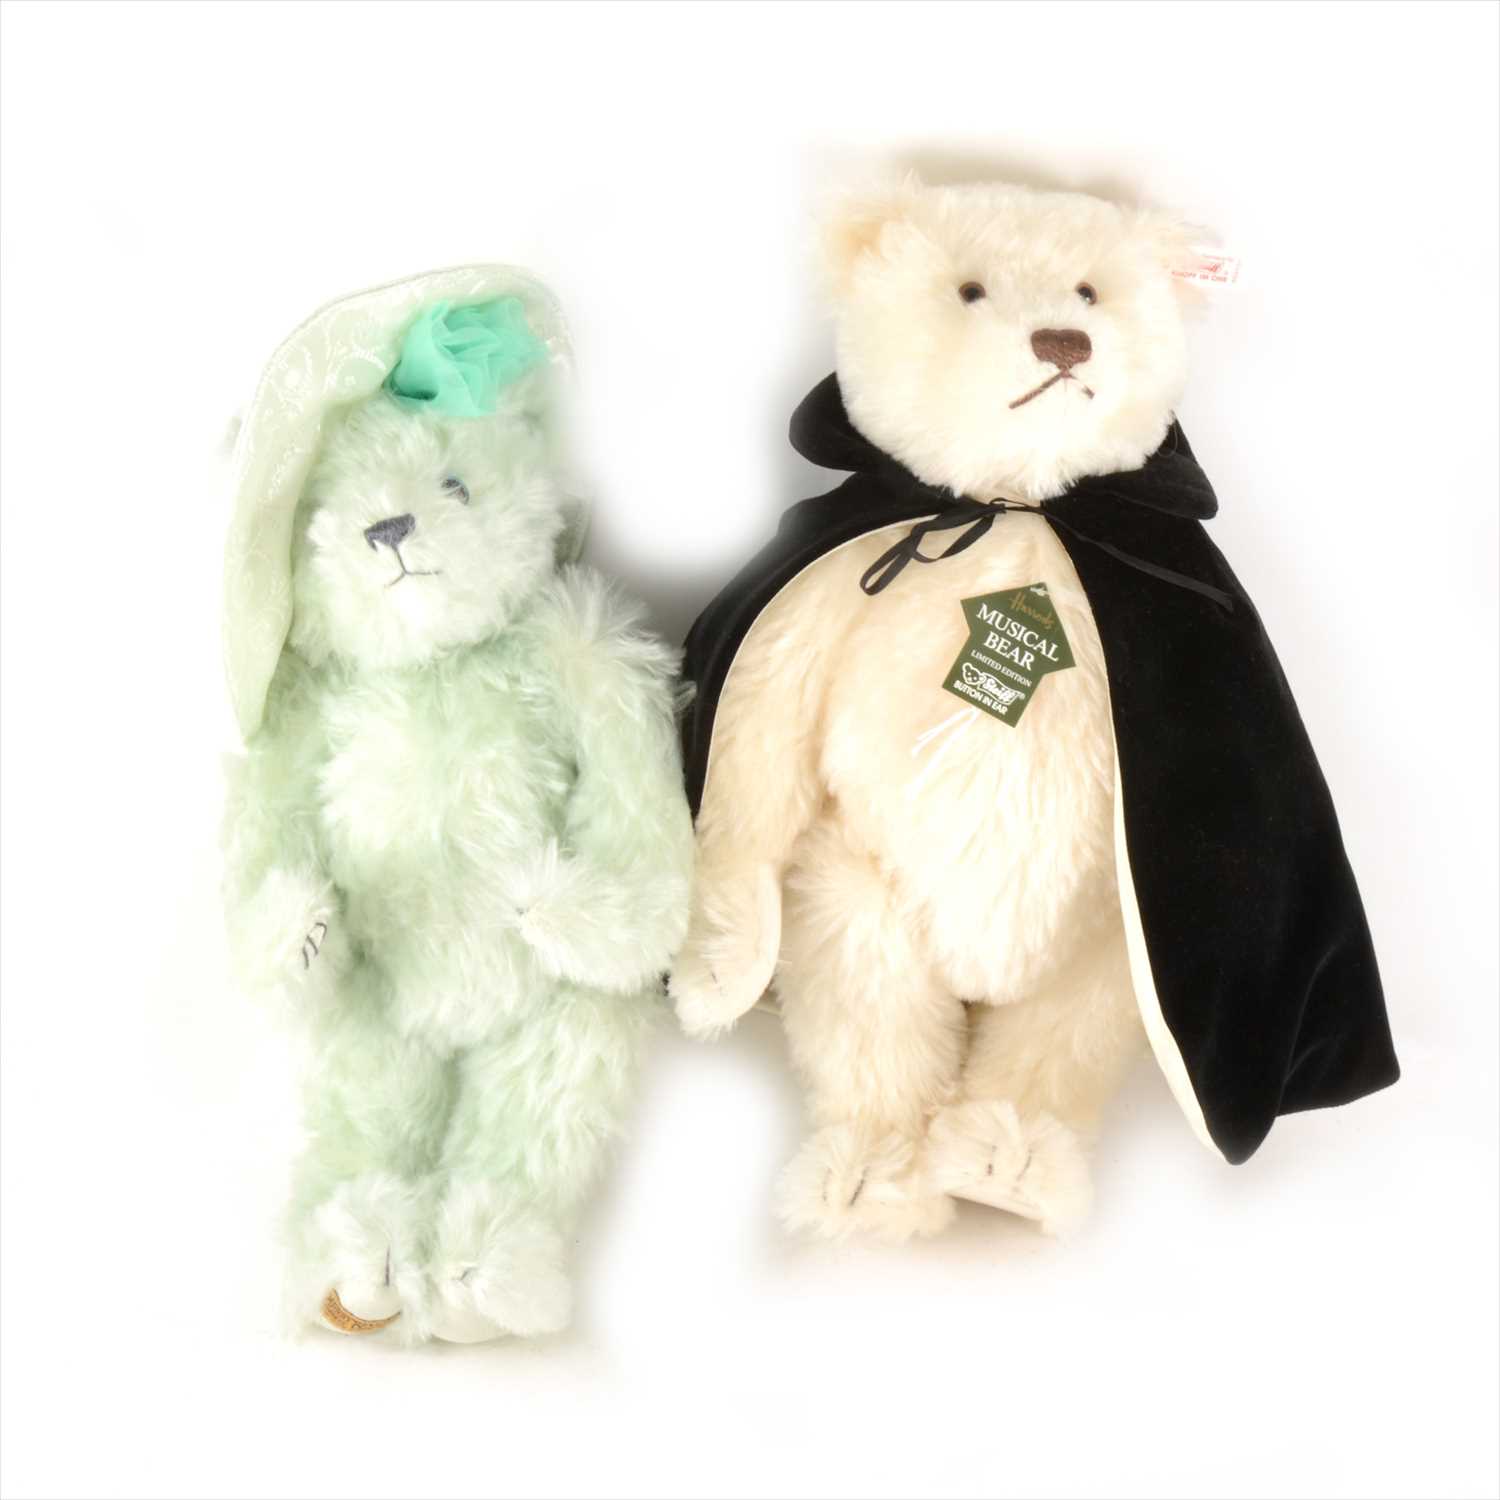 Lot 179 - Moden Steiff 'Phantom of the Opera' bear, unboxed, and a Merrythought 'Queen Mother' bear, boxed with ciritifcate.